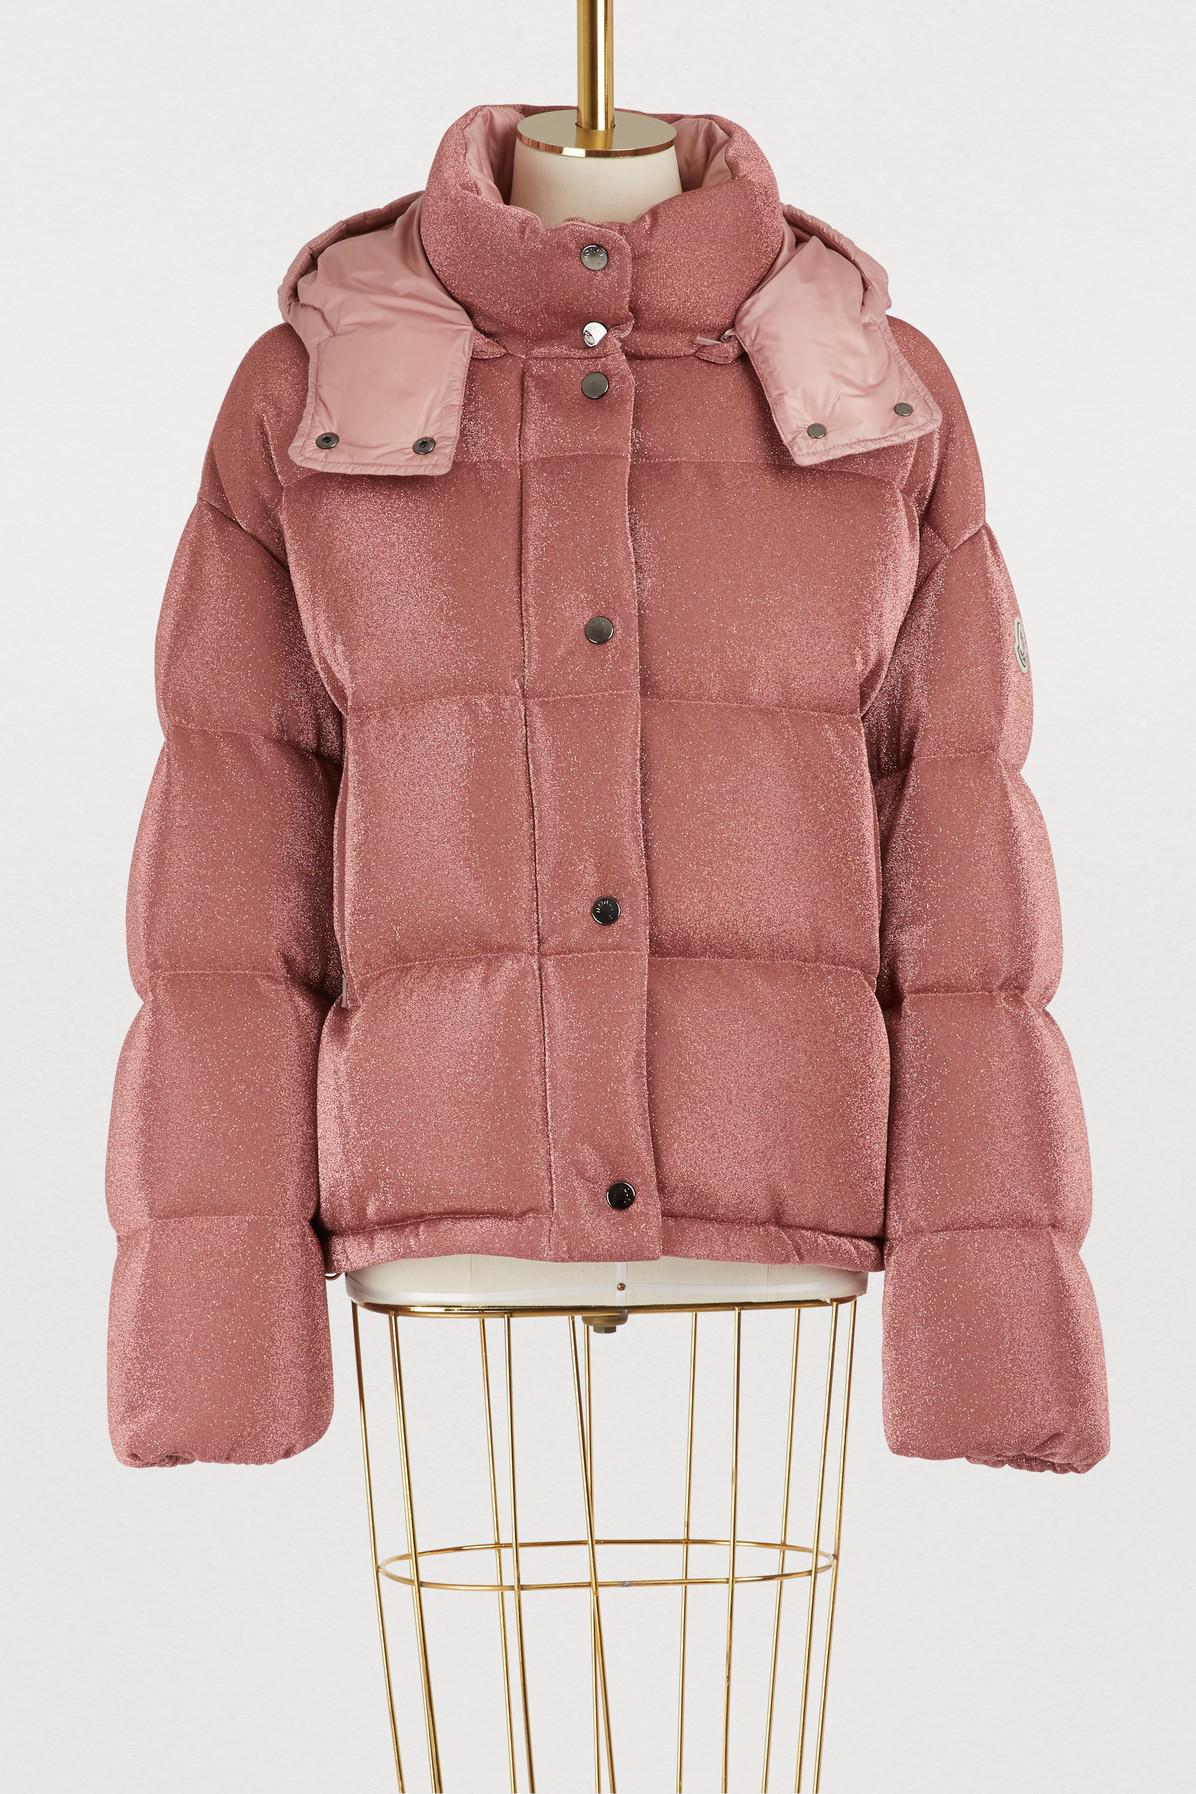 Moncler Caille Pink Outlet, SAVE 52%.